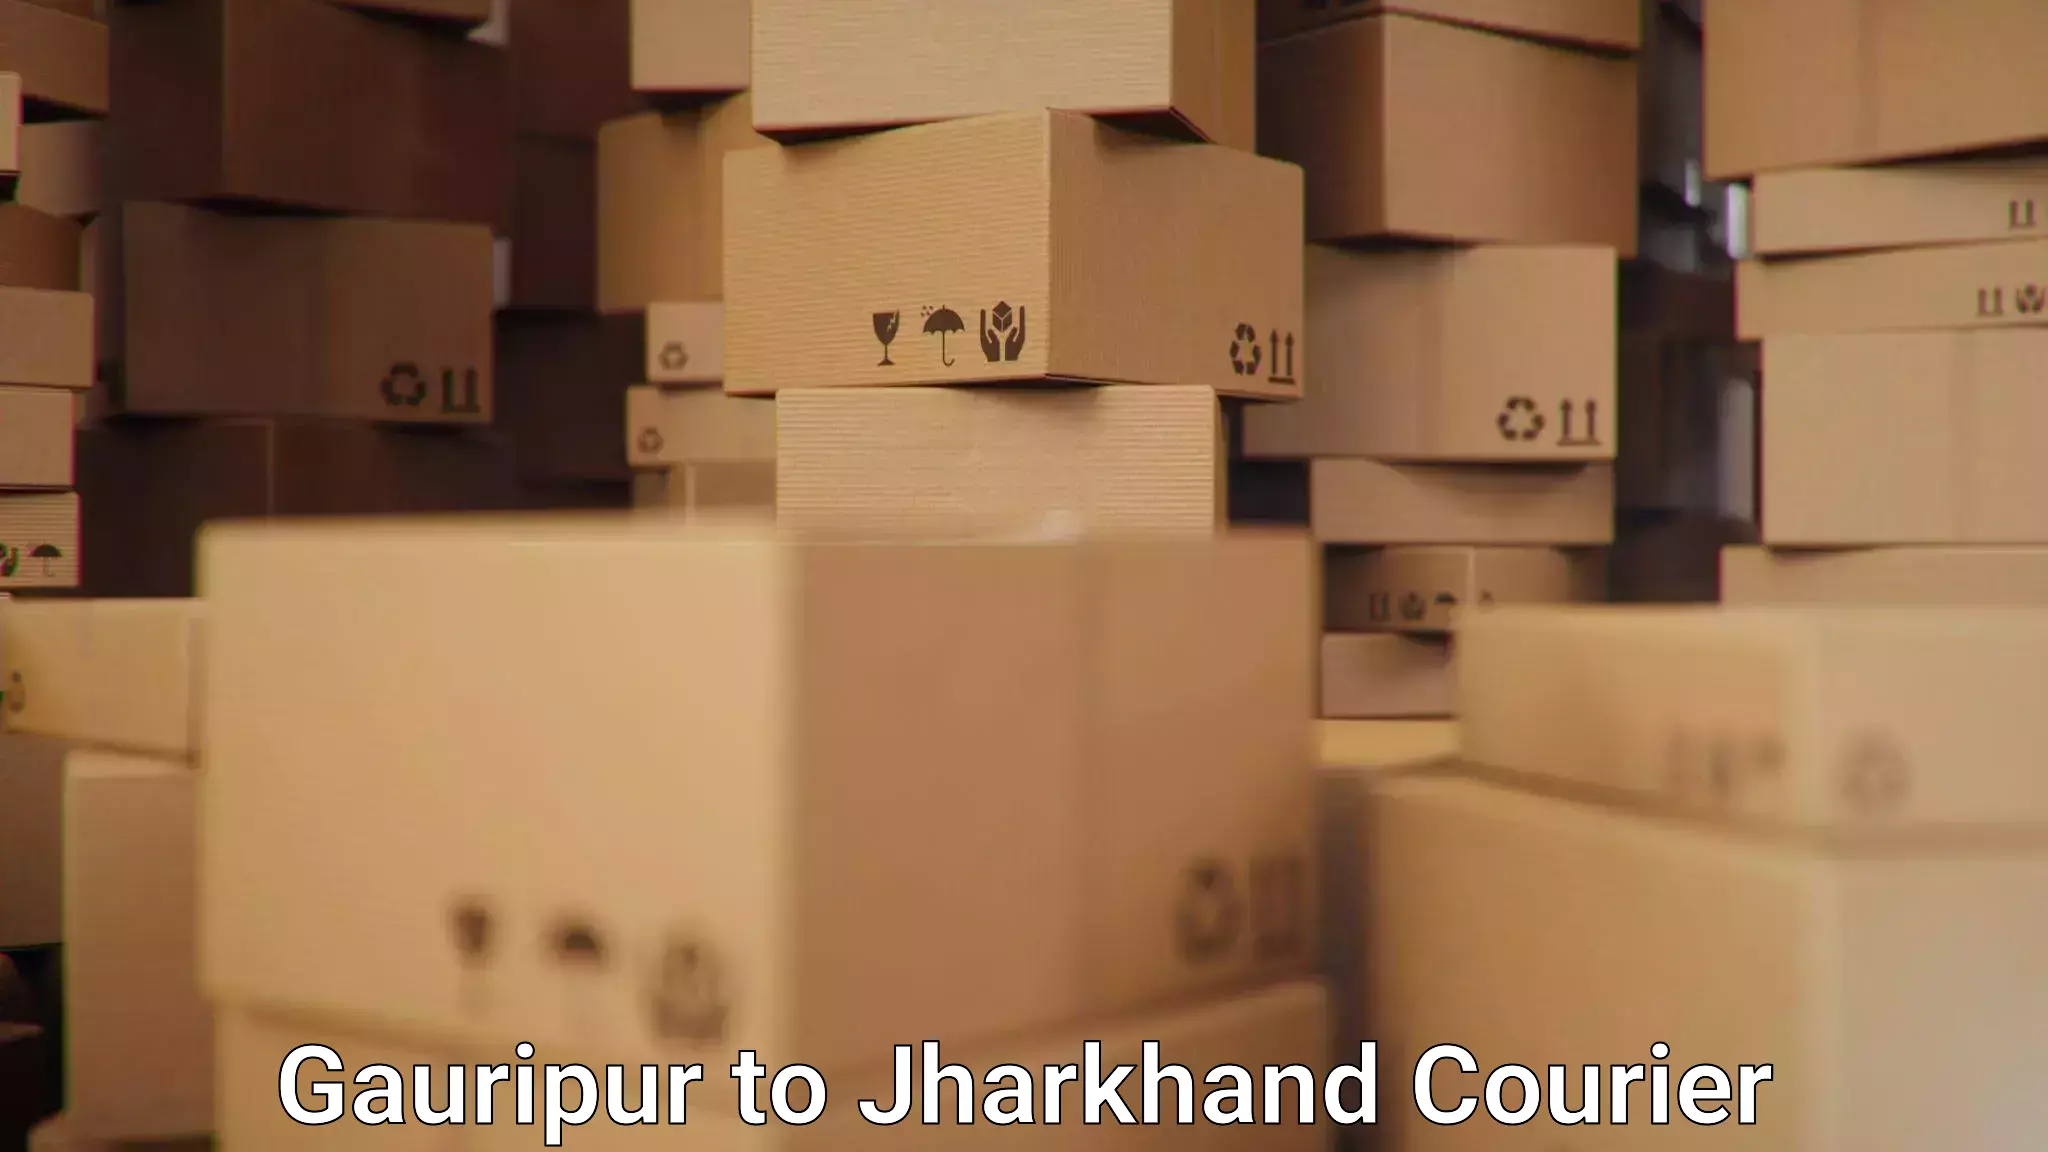 Nationwide parcel services Gauripur to Jharkhand